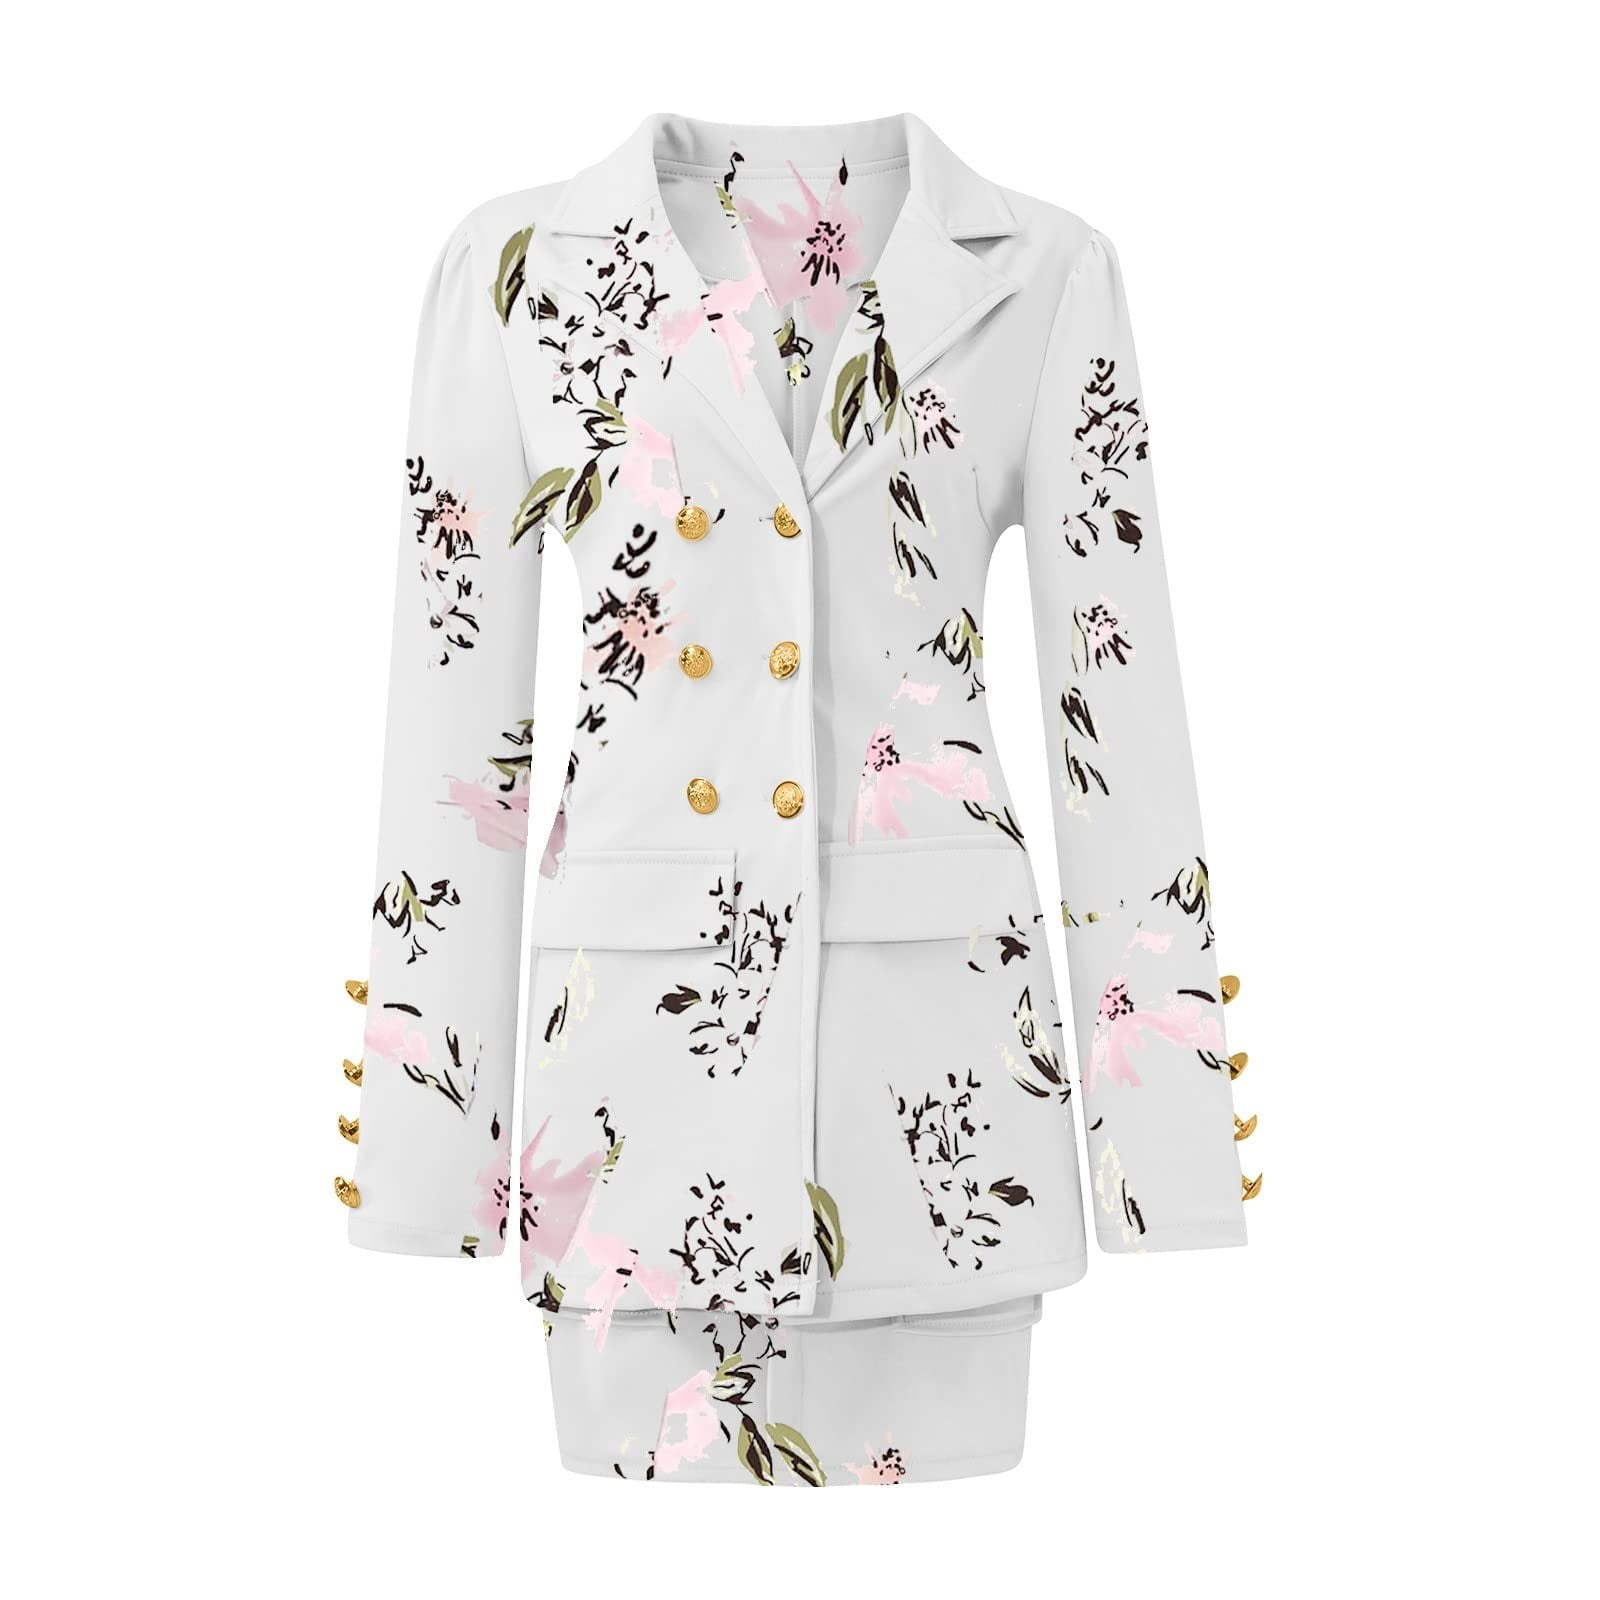 Niuer Women Floral Print Suit Sets Slim Fit Business 2 Piece Double  Breasted Blazer and Skirt With Pockets Casual Outfits White M 